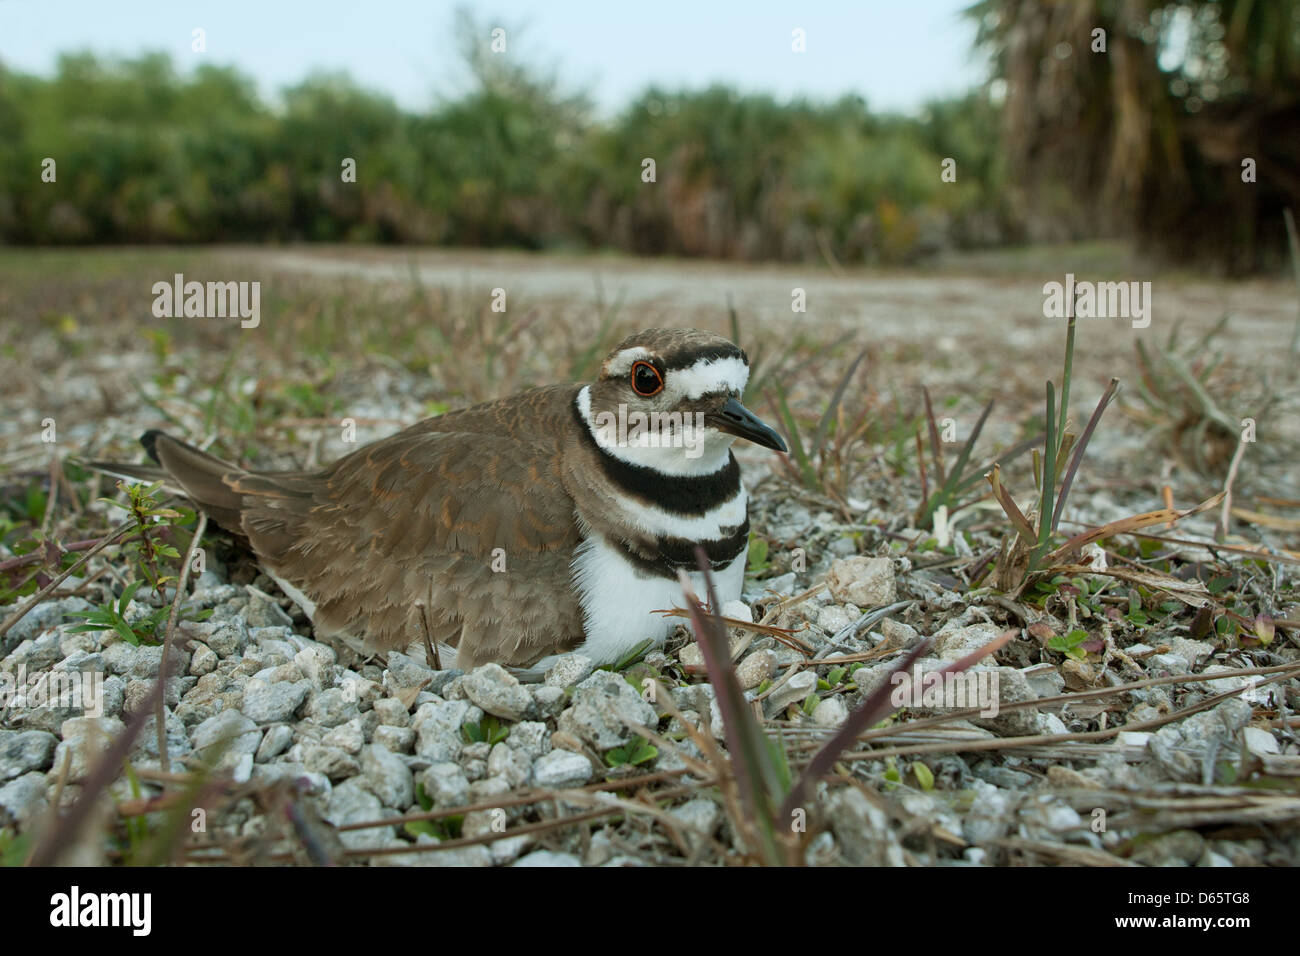 Wide angle view of Killdeer on its nest nests bird birds songbird songbirds plover plovers nature wildlife environment Stock Photo